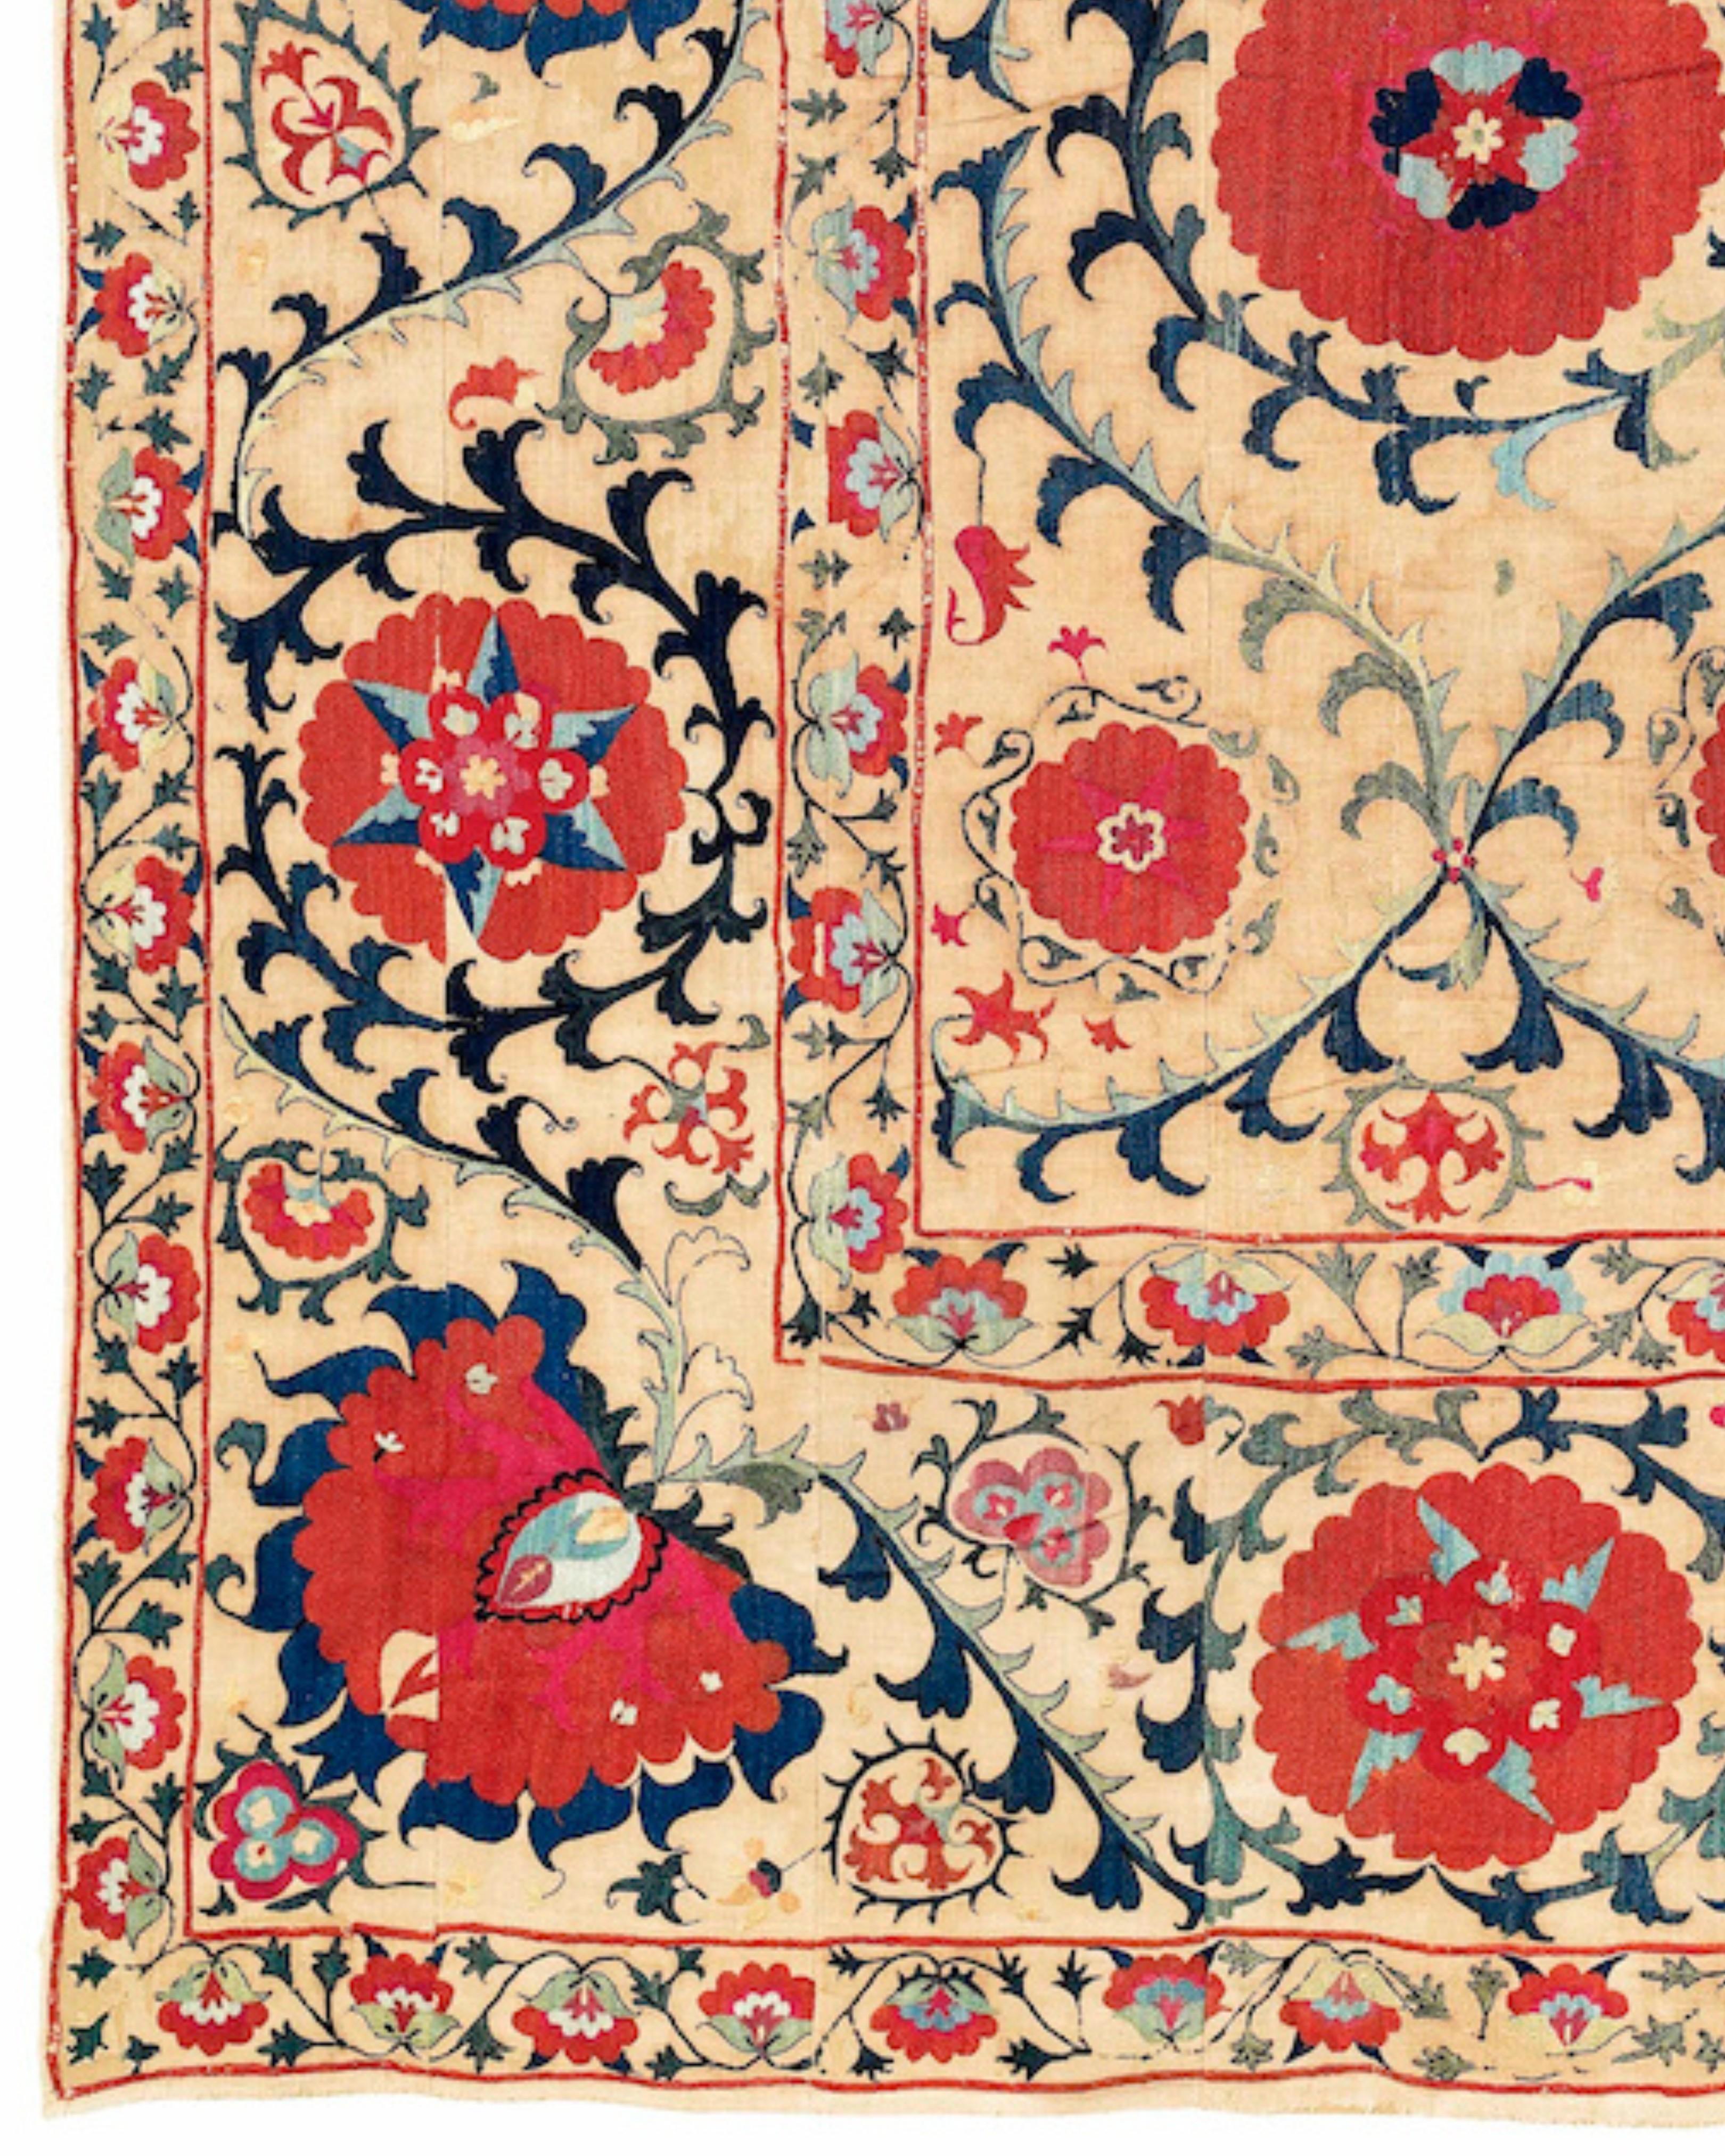 Embroidered Antique Uzbek Suzani Embroidery Rug, c. 1800 For Sale